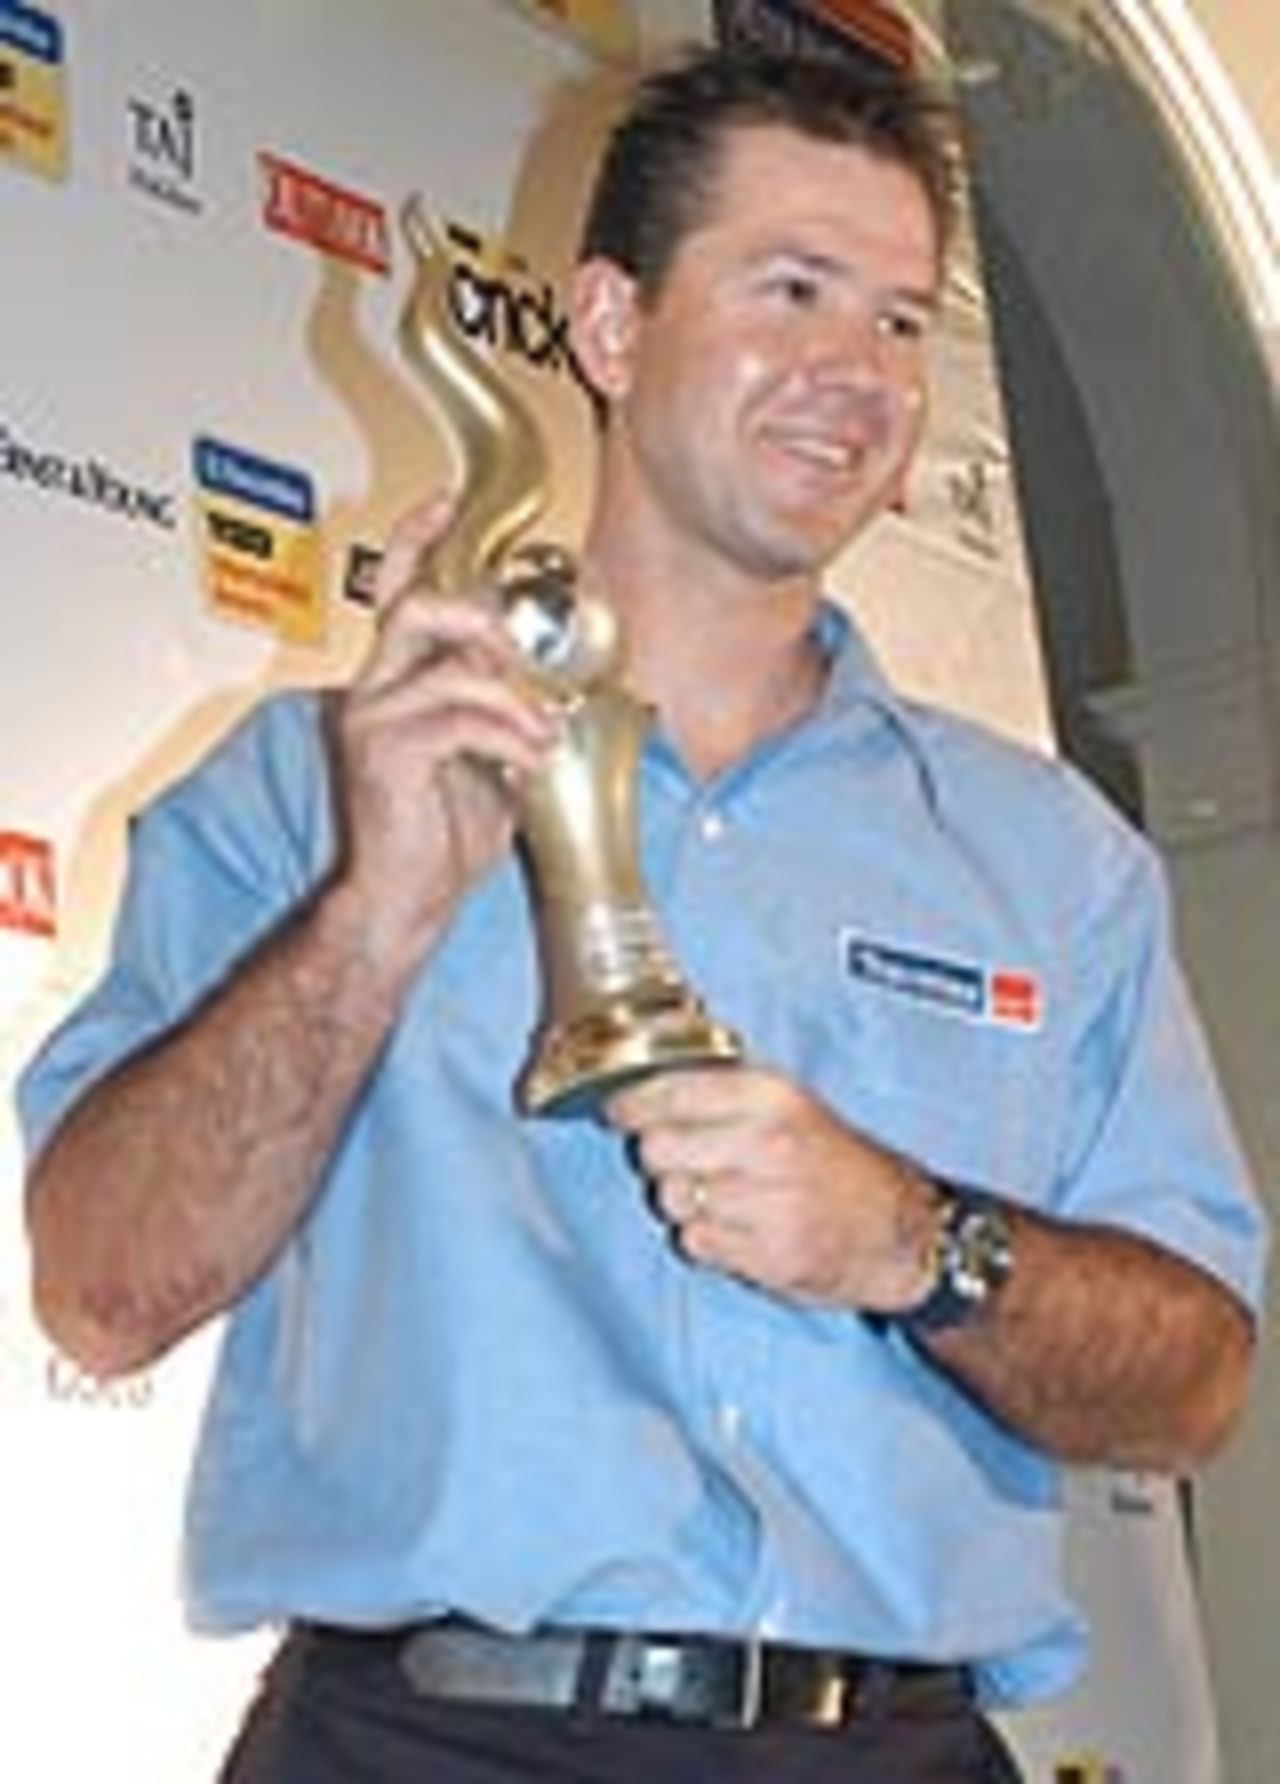 Ricky Ponting, the Electrolux Wisden Cricketer of the Year, poses with his trophy. October 30, 2003